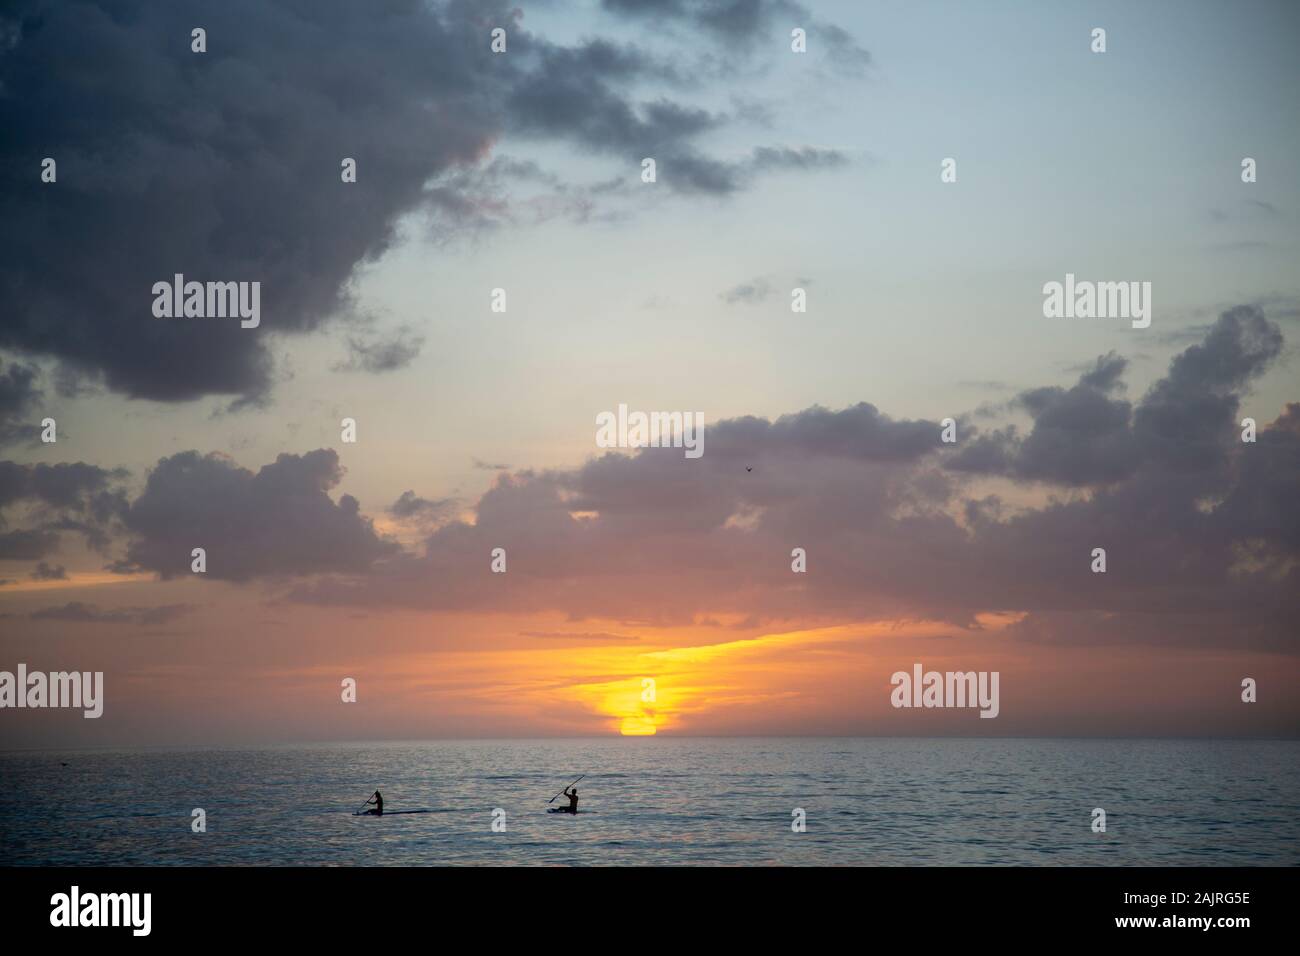 Two people kayaking on the ocean during sunset in Florida Stock Photo